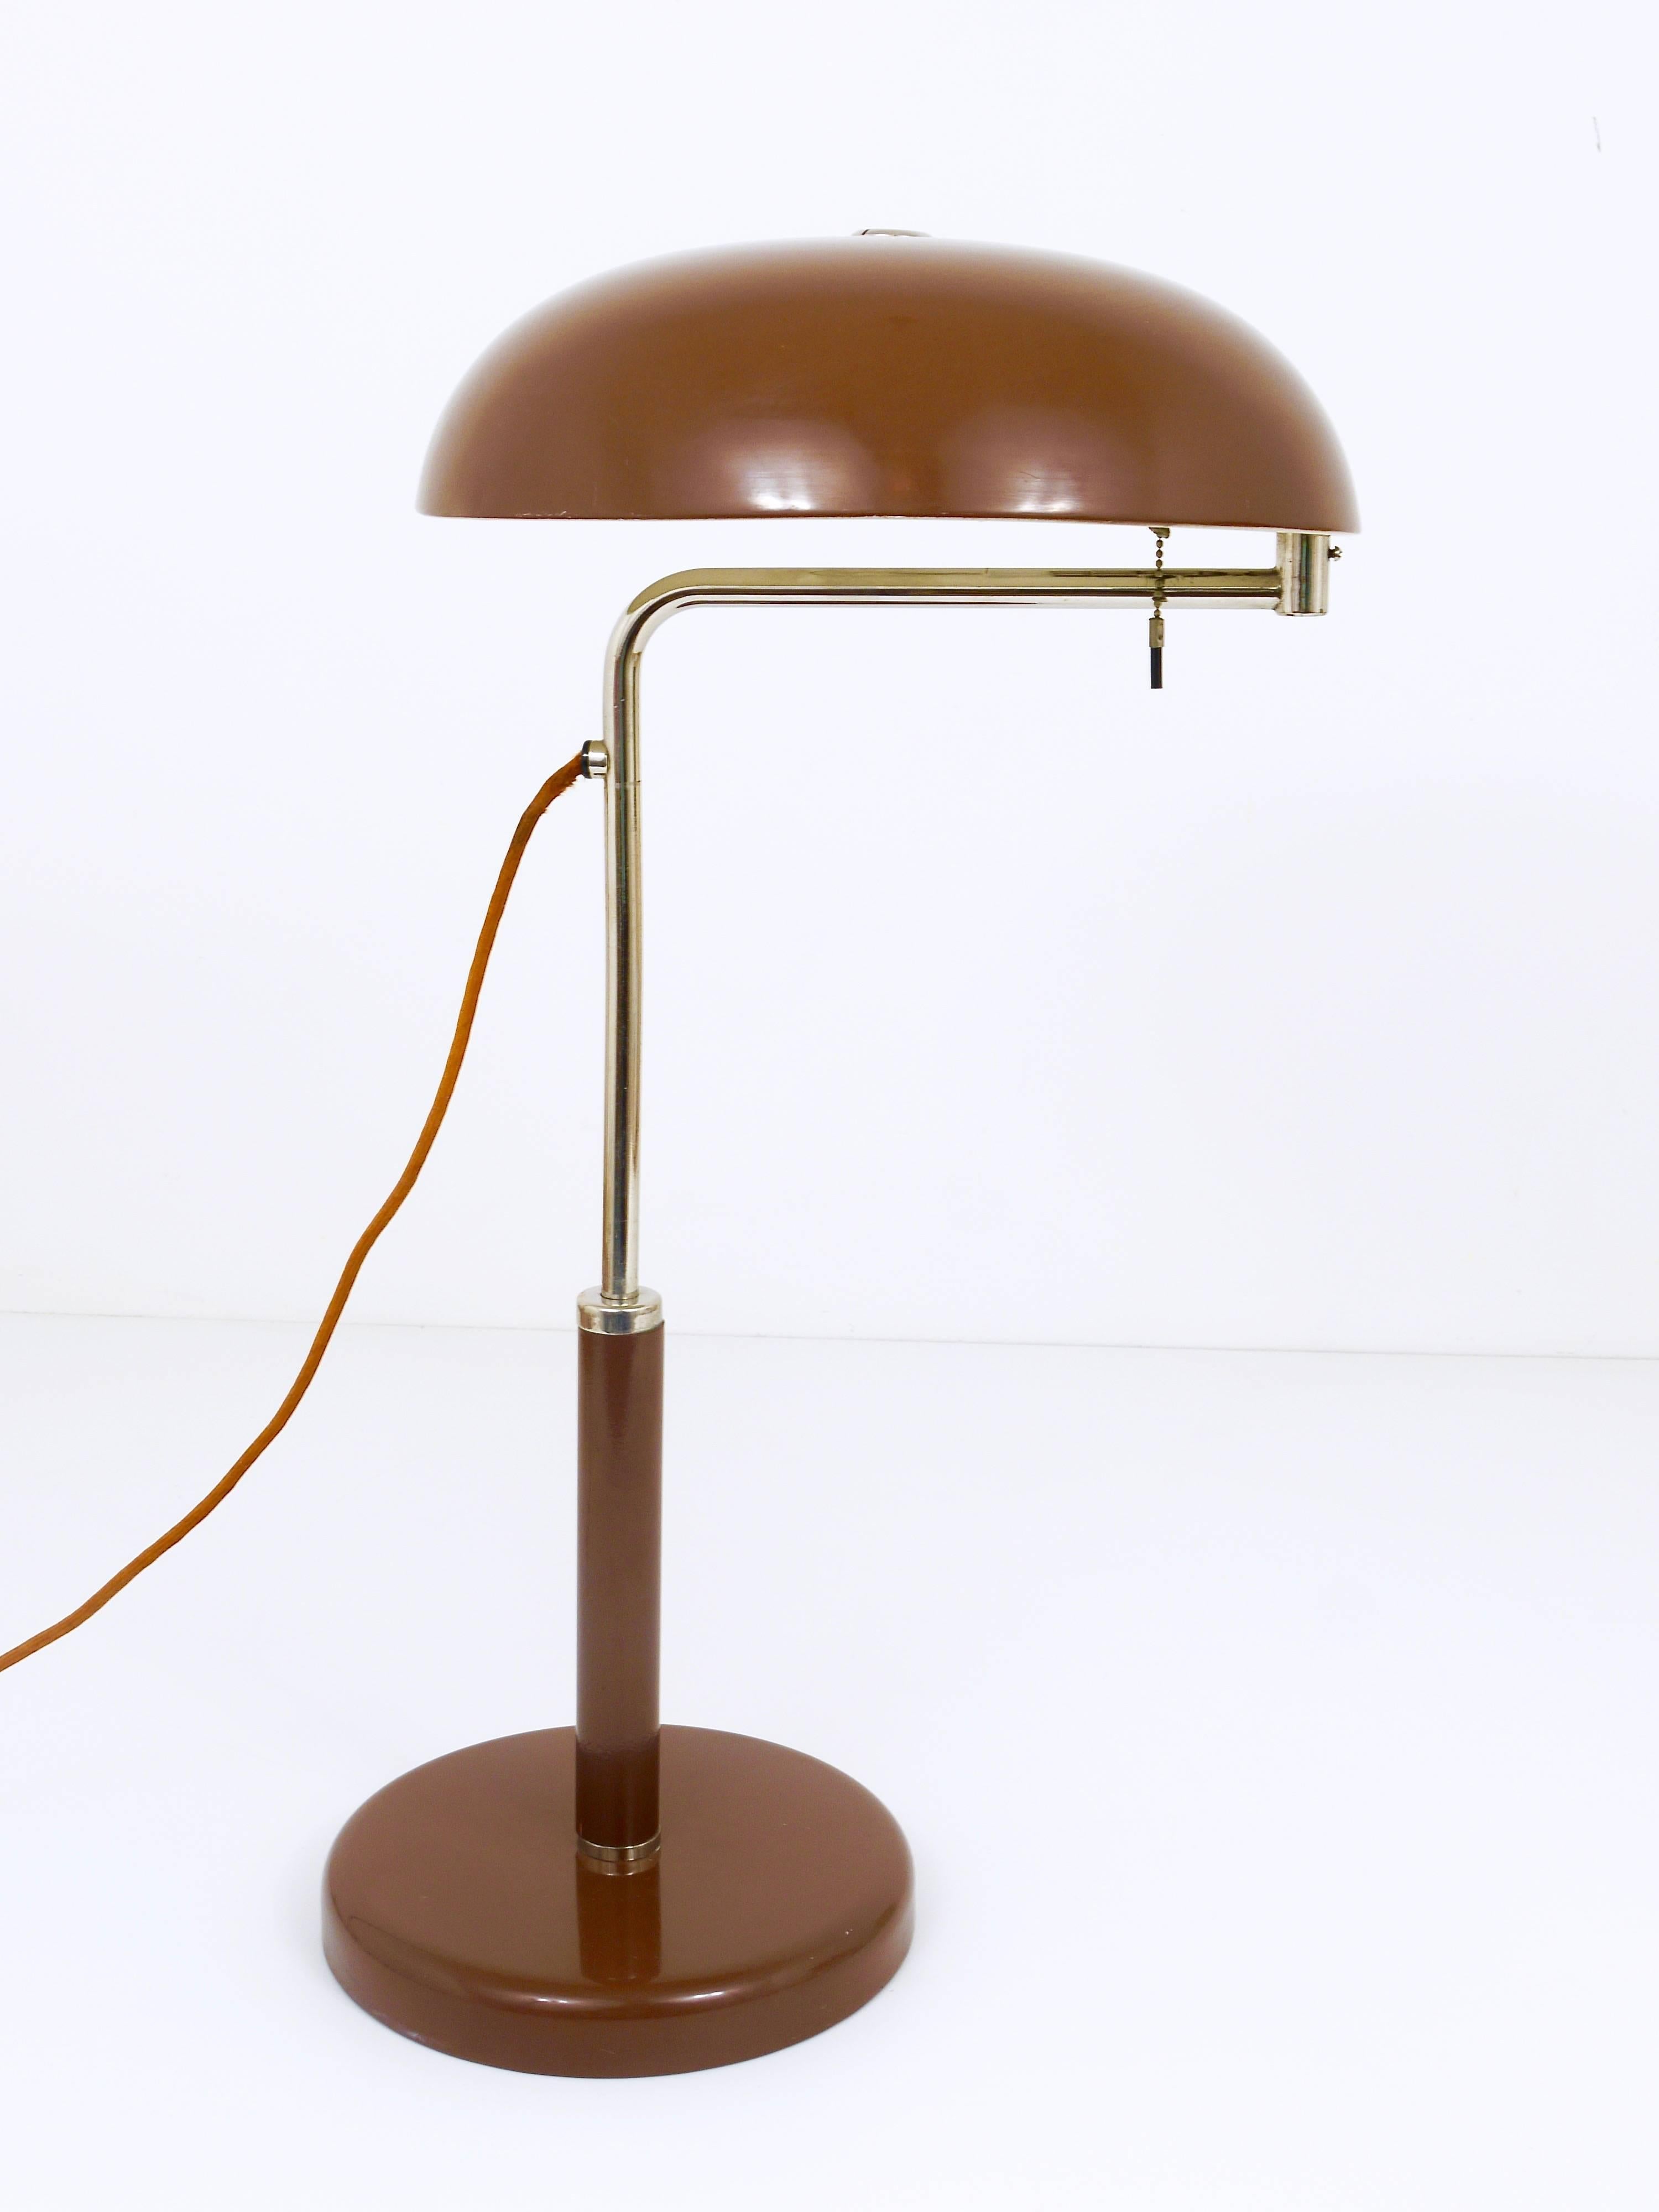 A beautiful brown Bauhaus table lamp from the 1930s. Model 